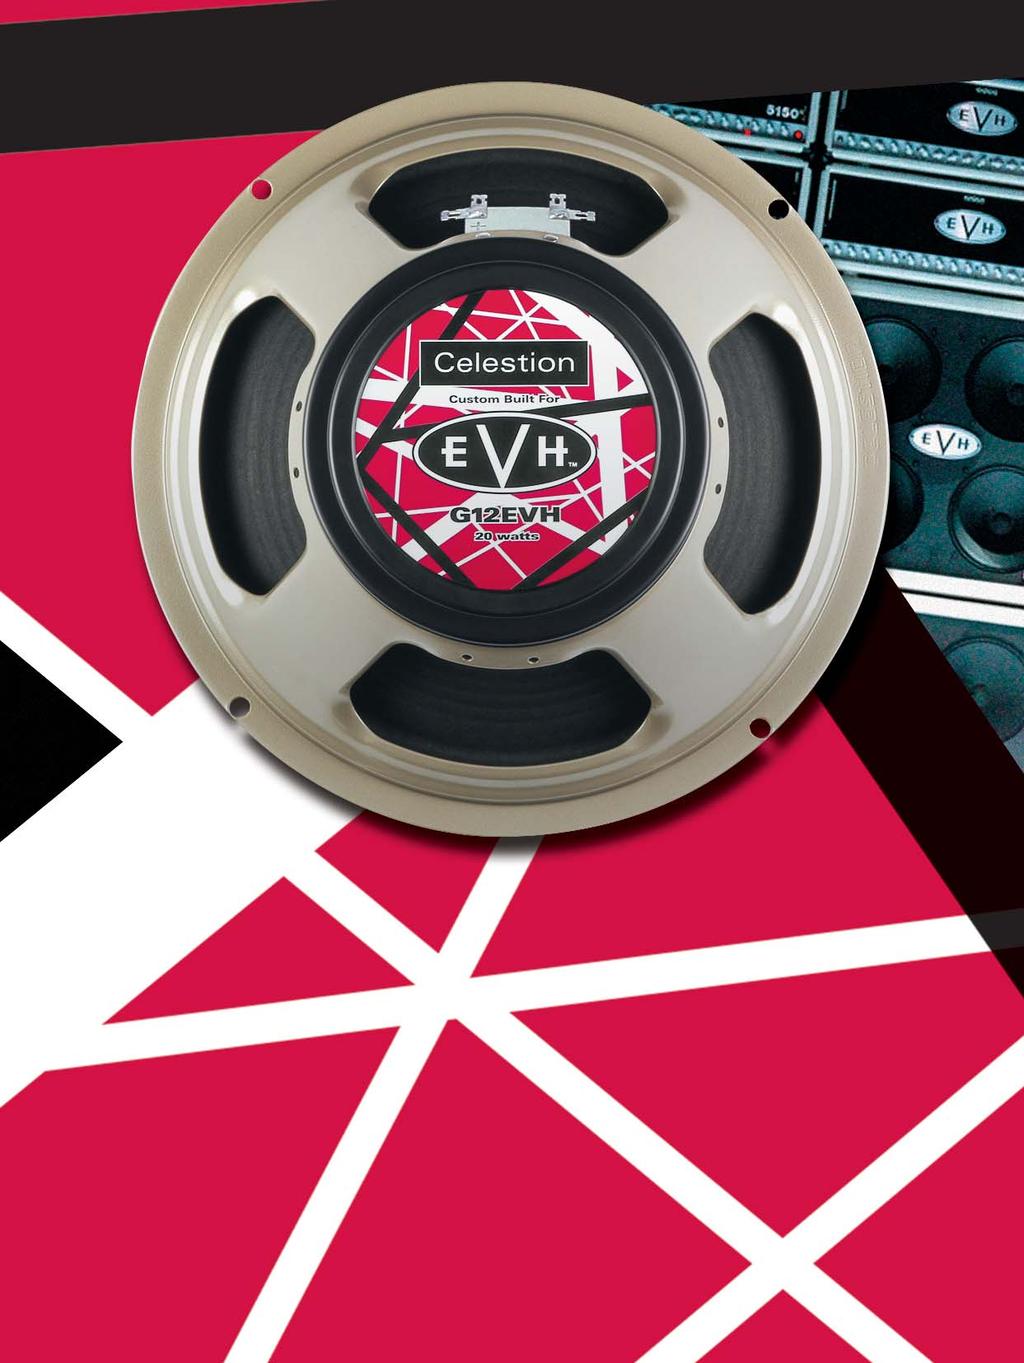 Throughout his career, whether in the studio or on the stage, the Celestion 20-watt Greenback has played an essential role to Edward Van Halen in making the tones that rewrote the book on guitar